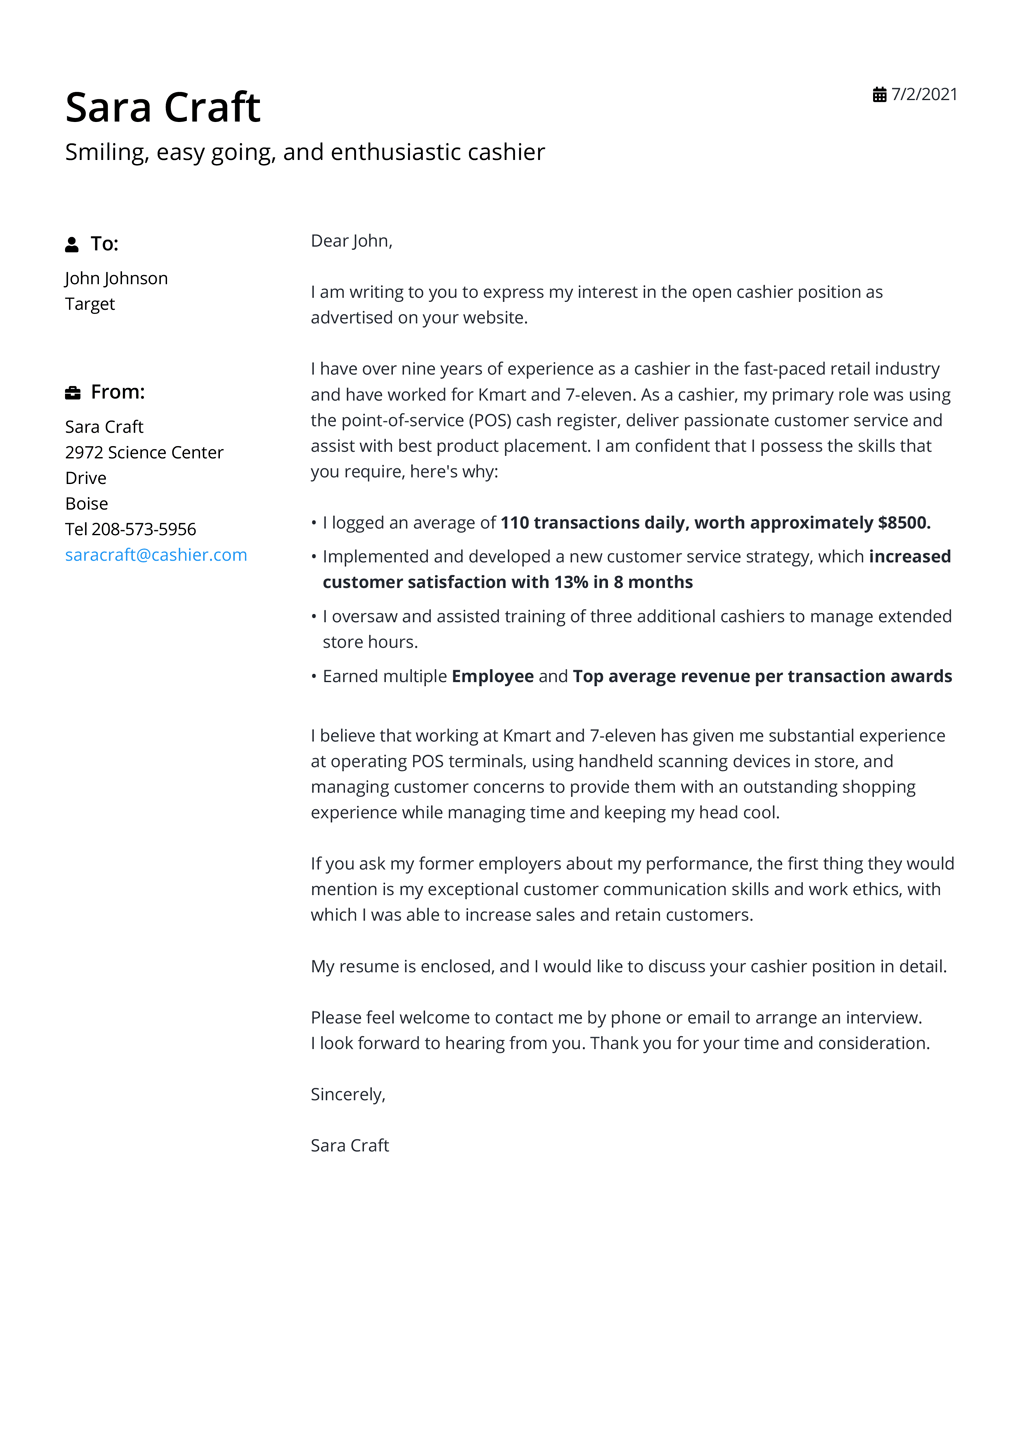 A Cover Letter Example from jofibo.com